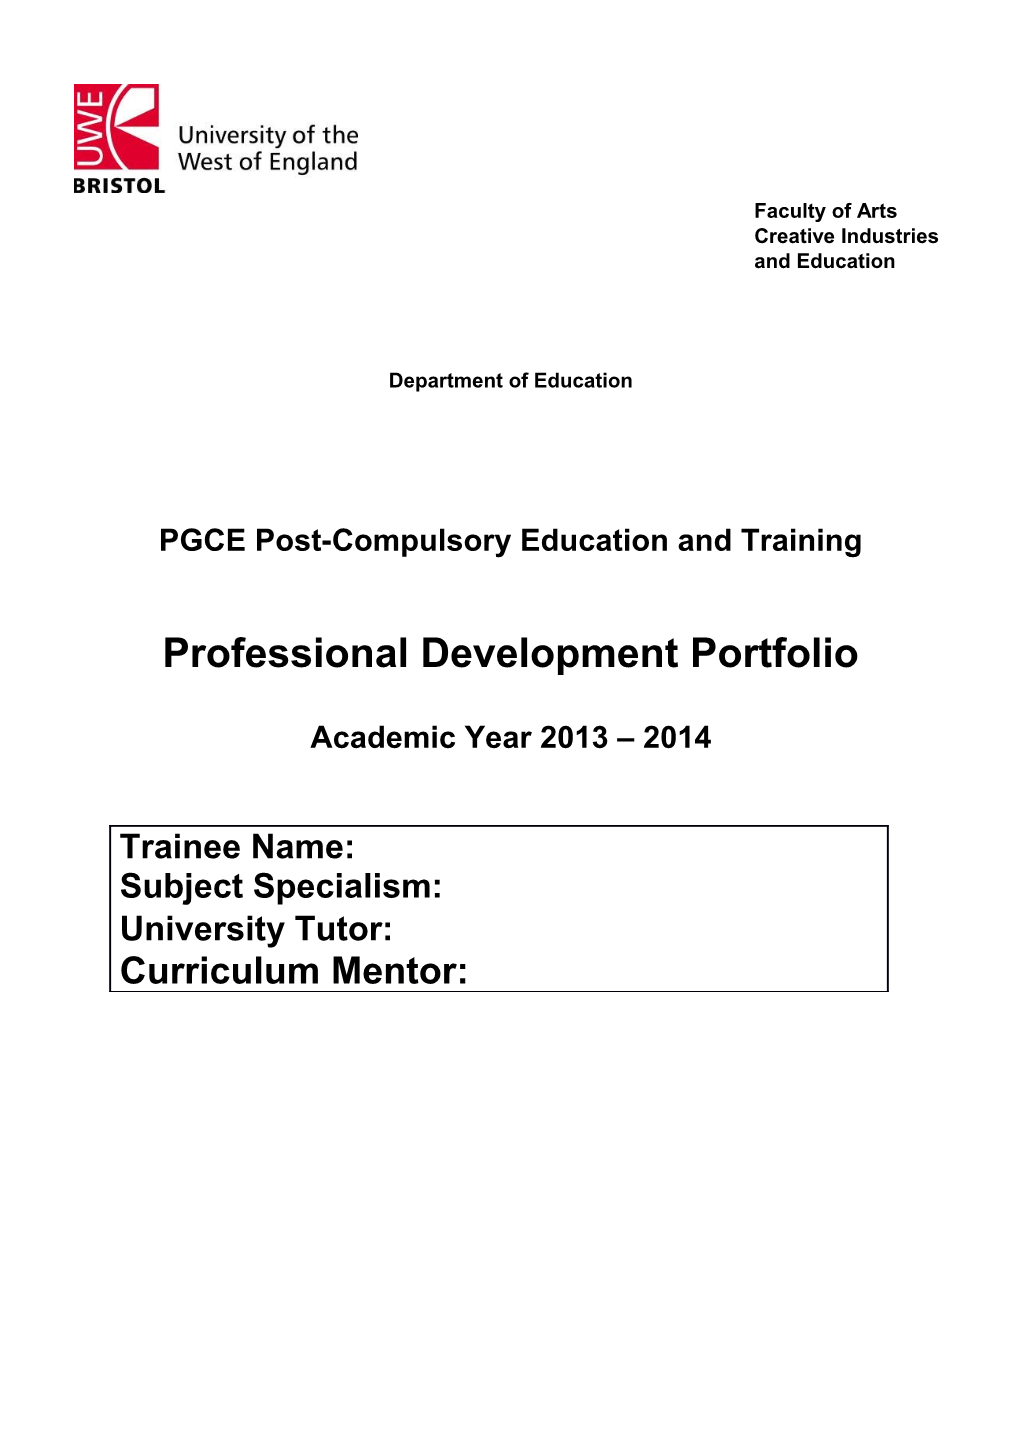 PGCE Post-Compulsory Education and Training